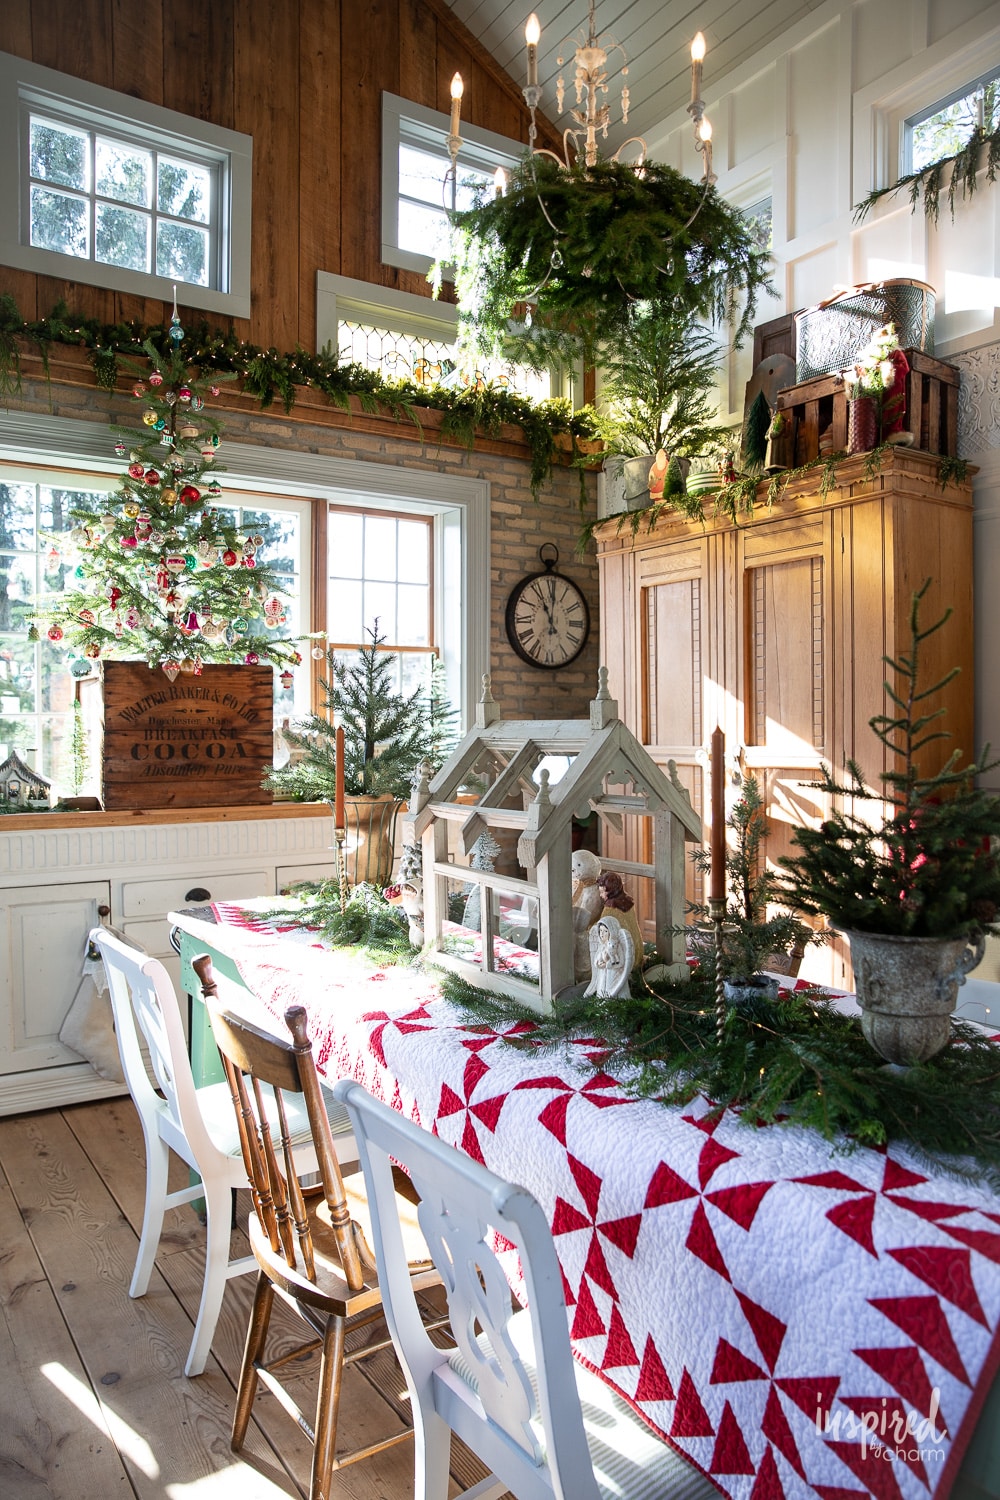 view into garden house with festive holiday decor.